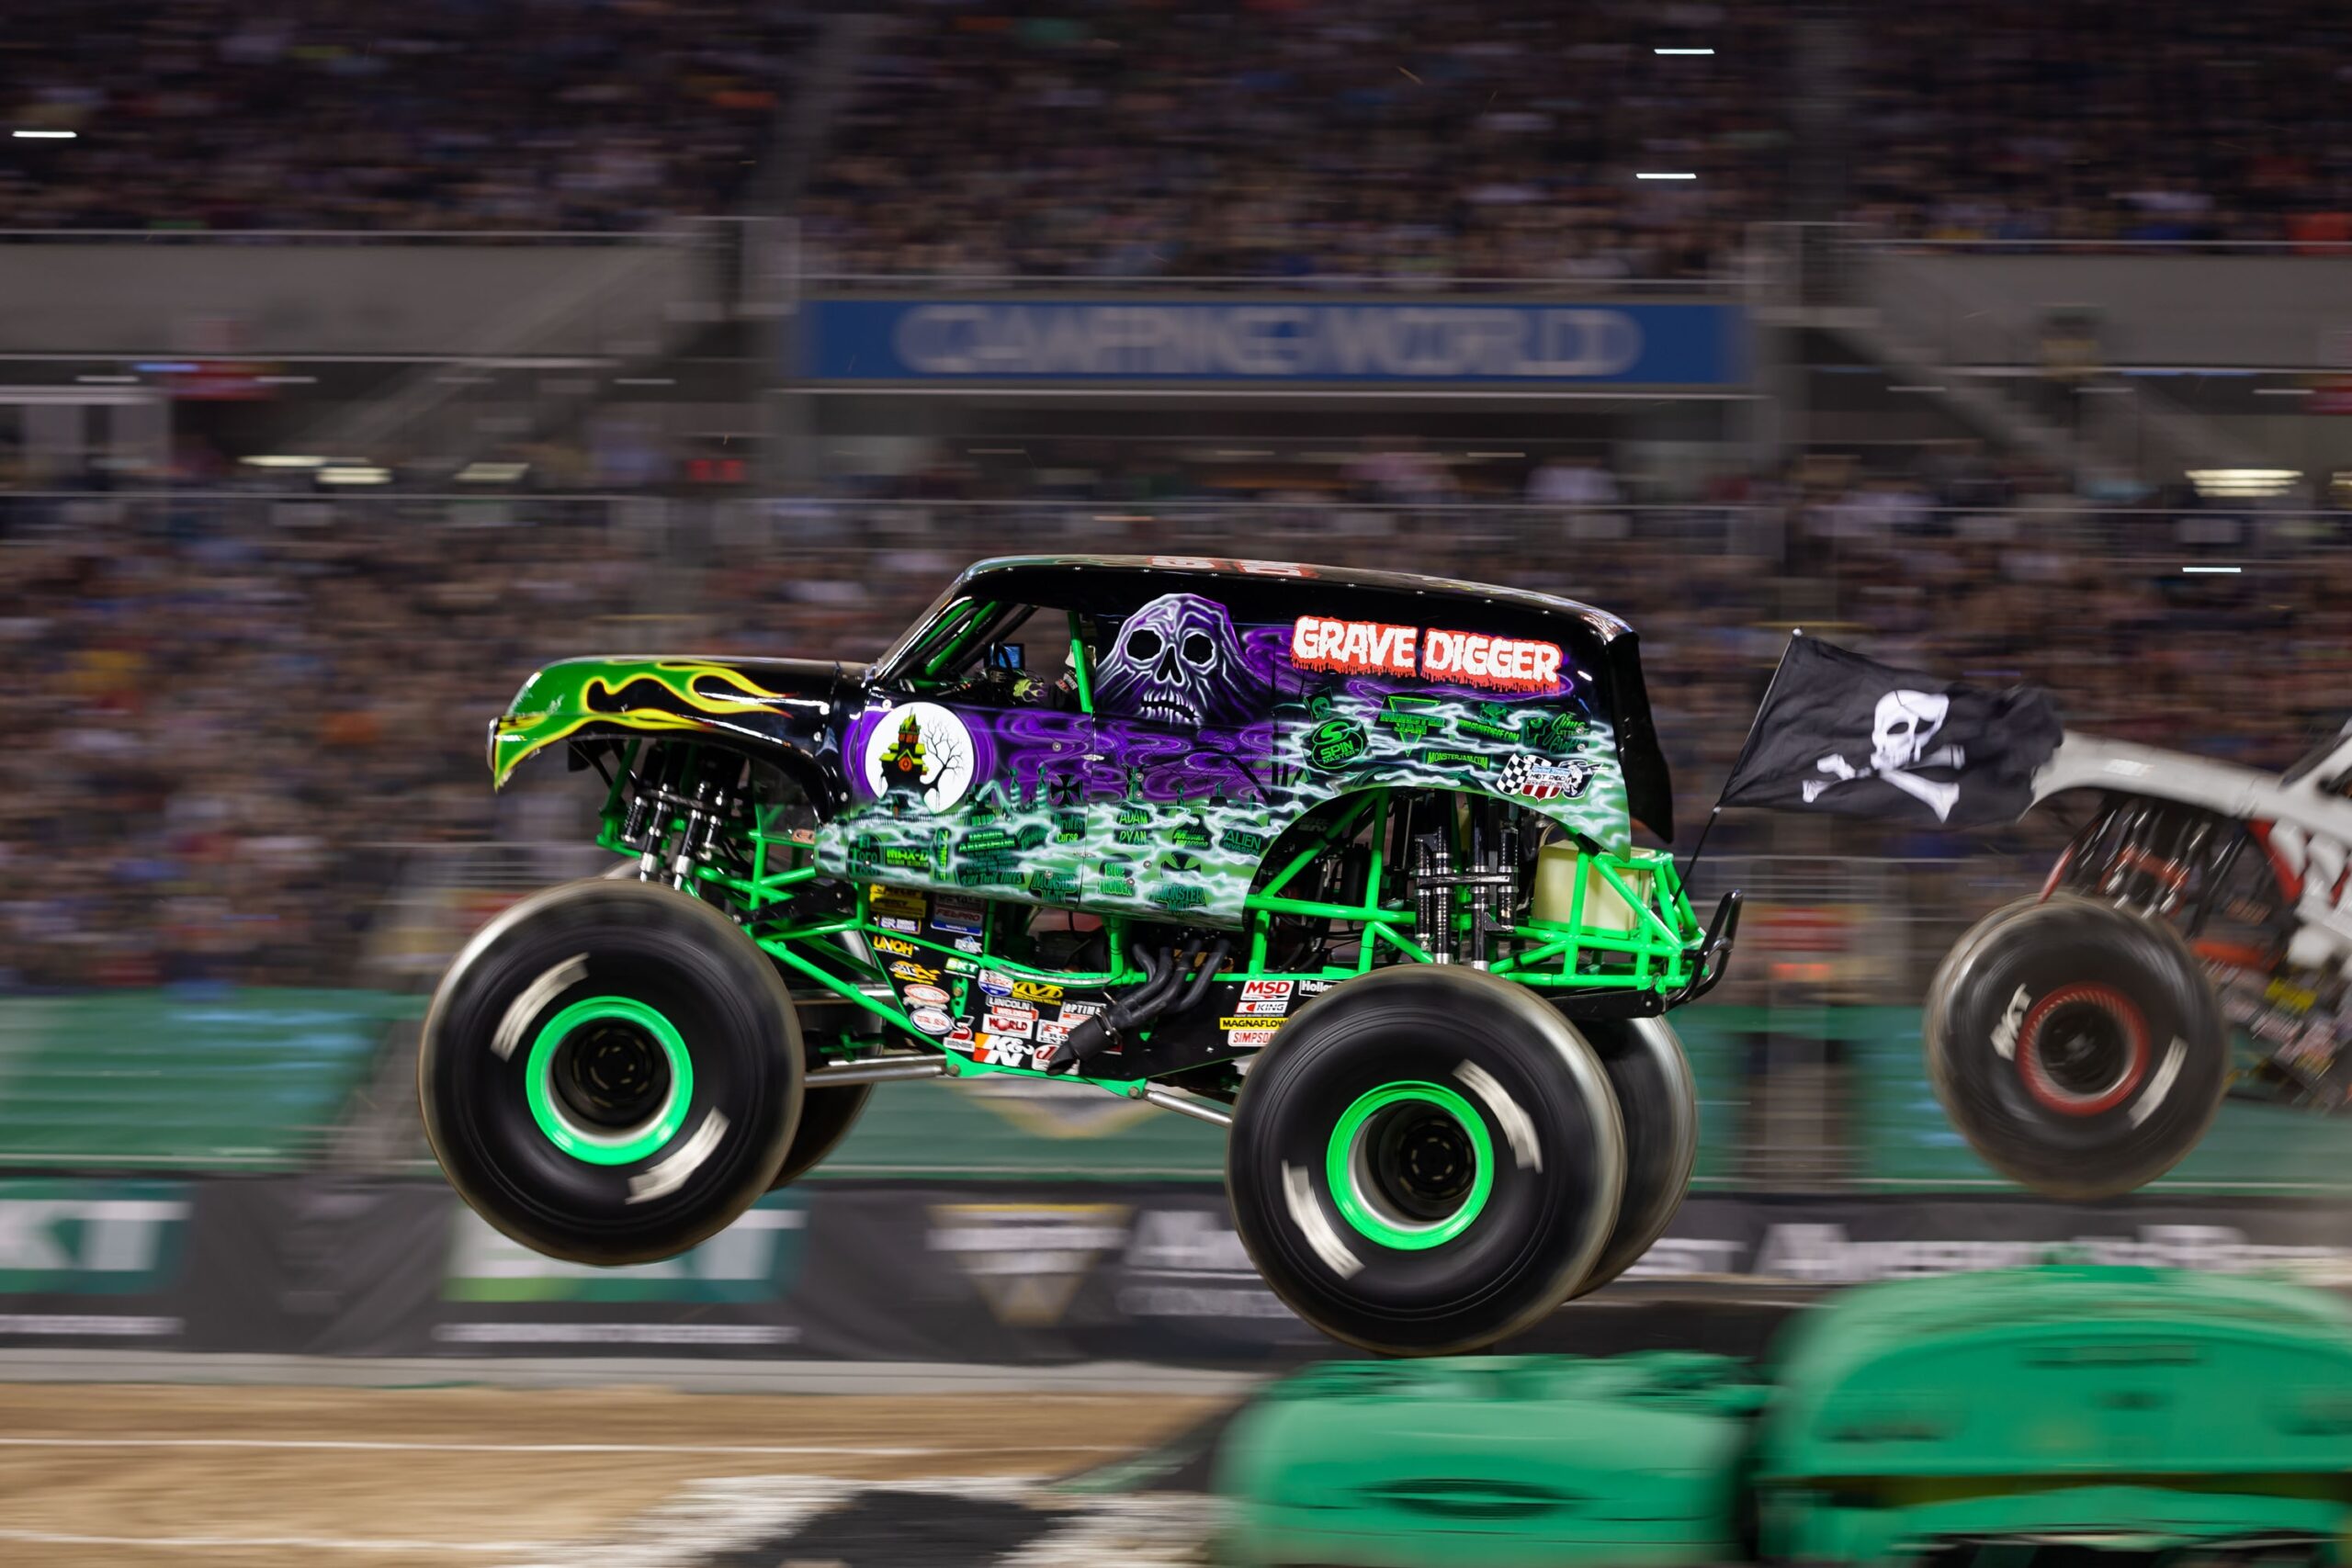 Monster Jam is coming to Columbus April 1-2, 2023